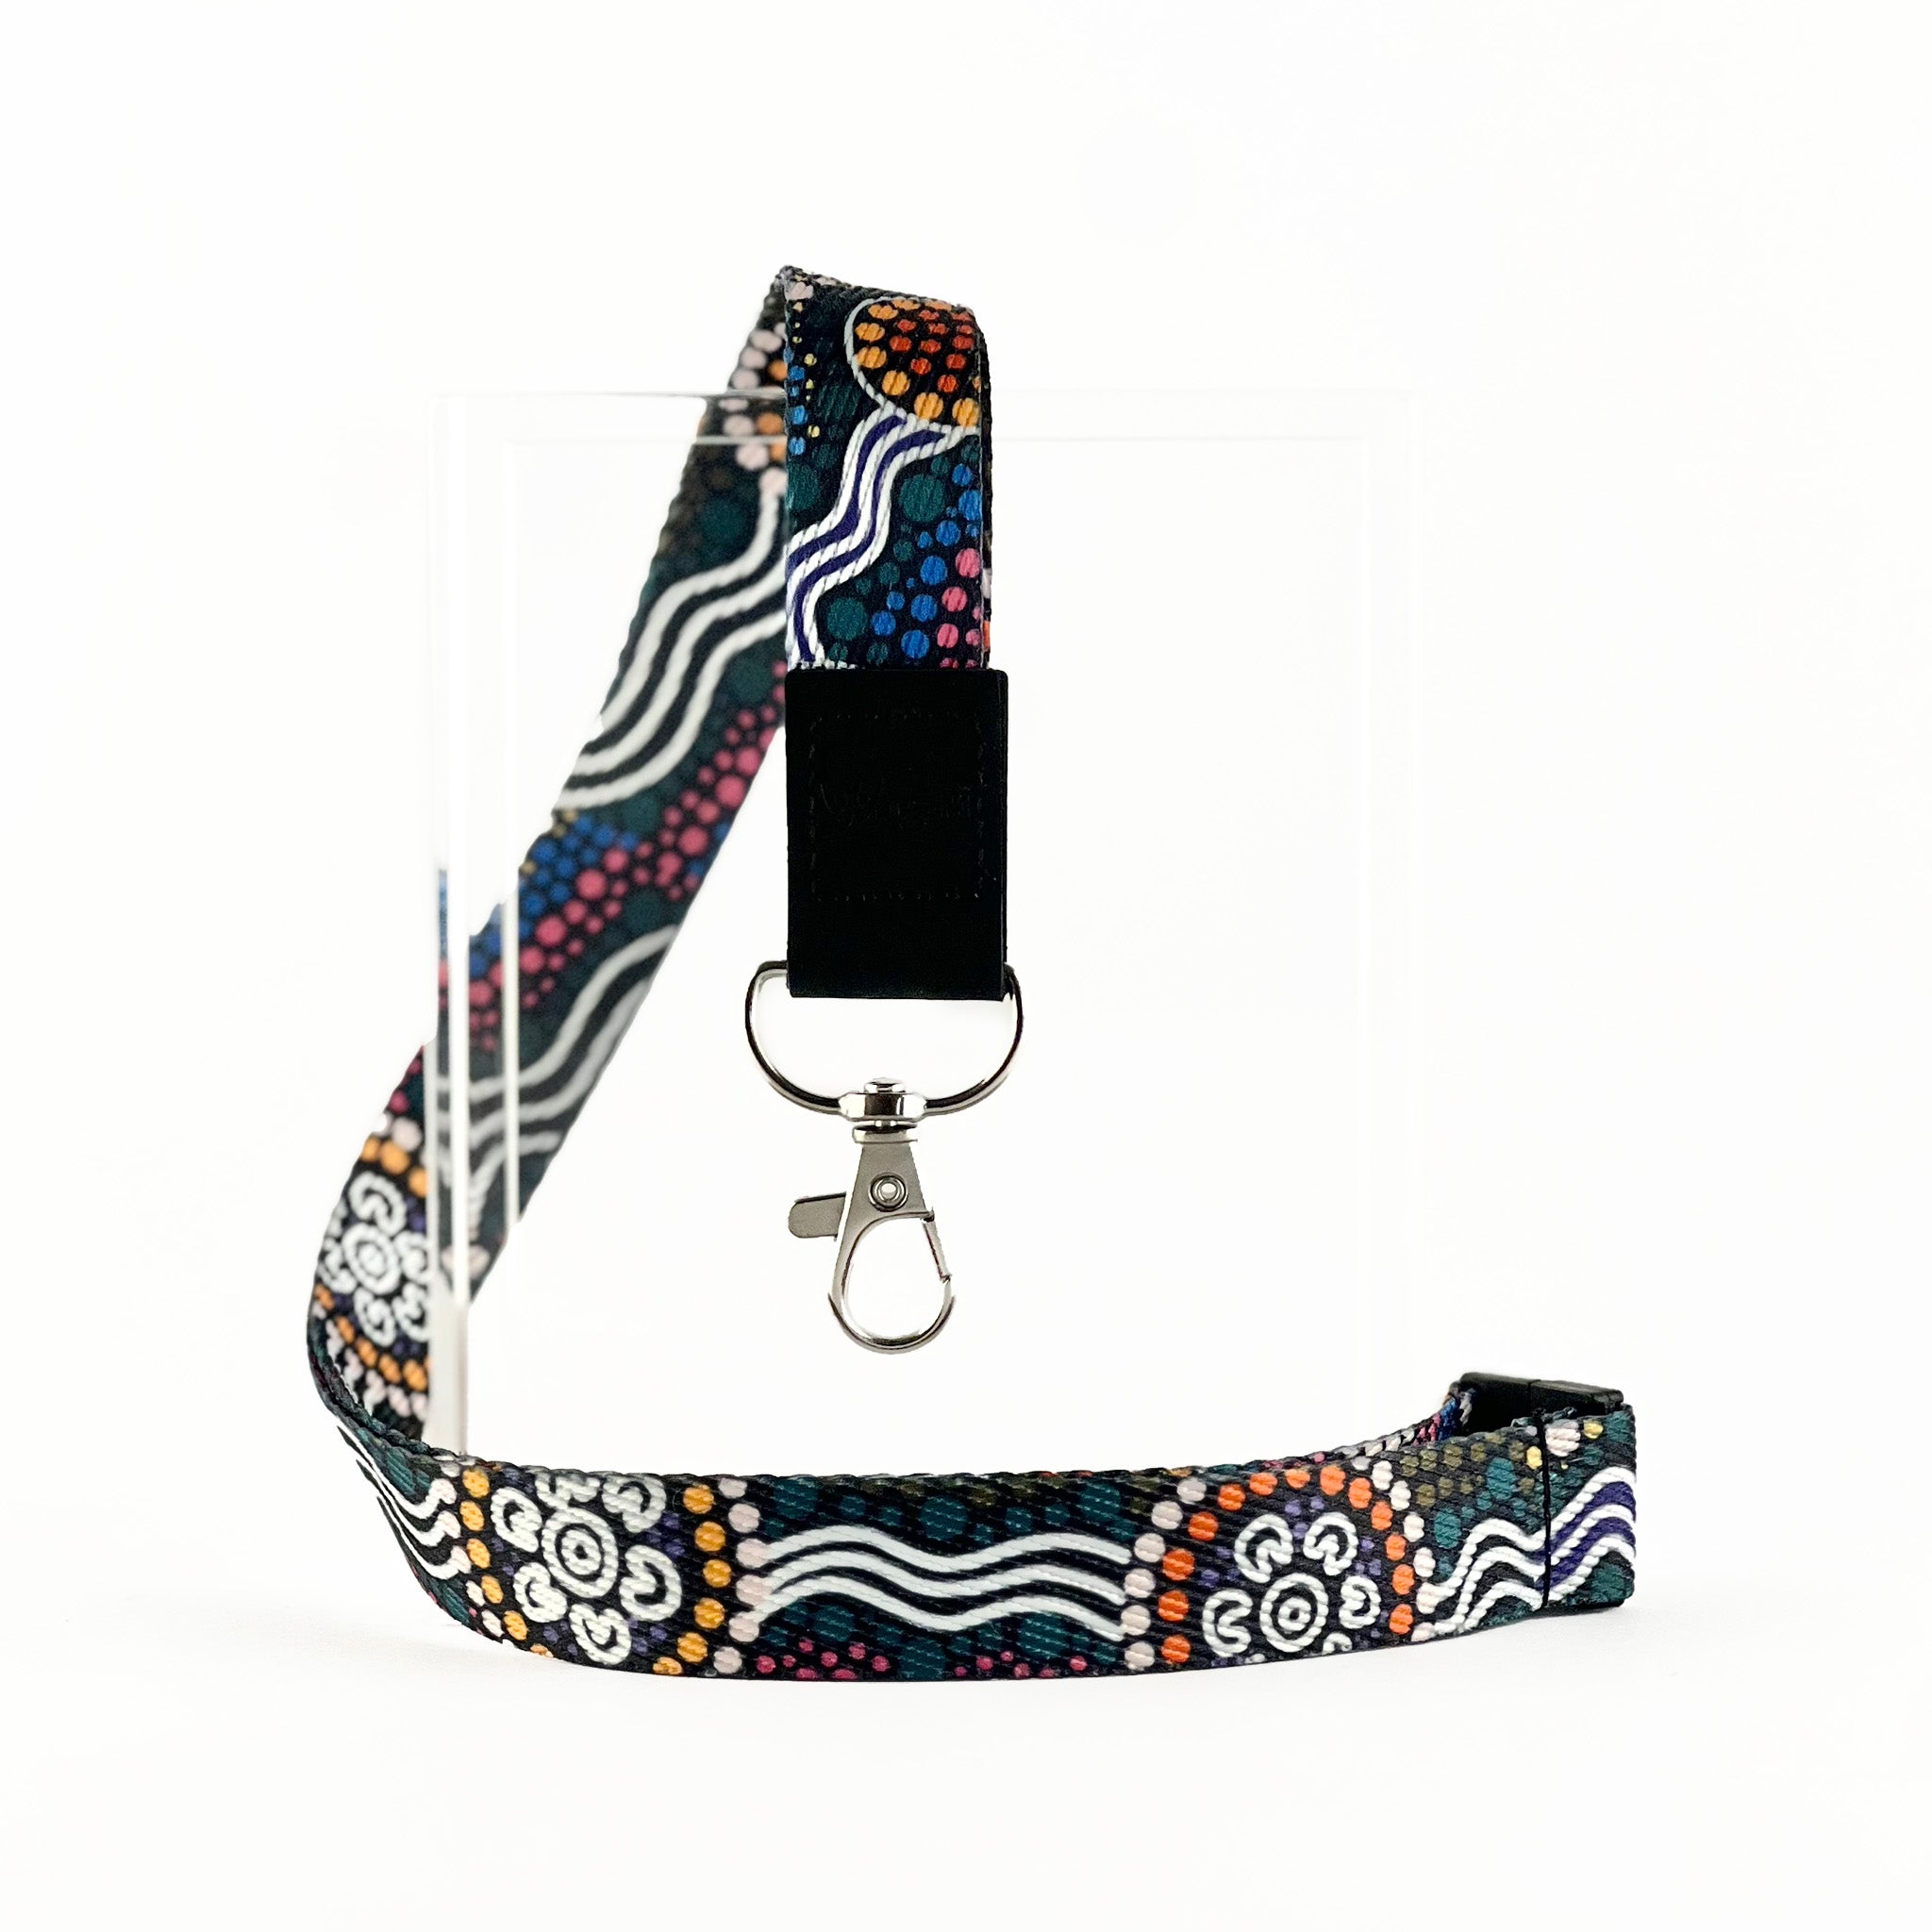 Lanyards Featuring First Nations Artwork